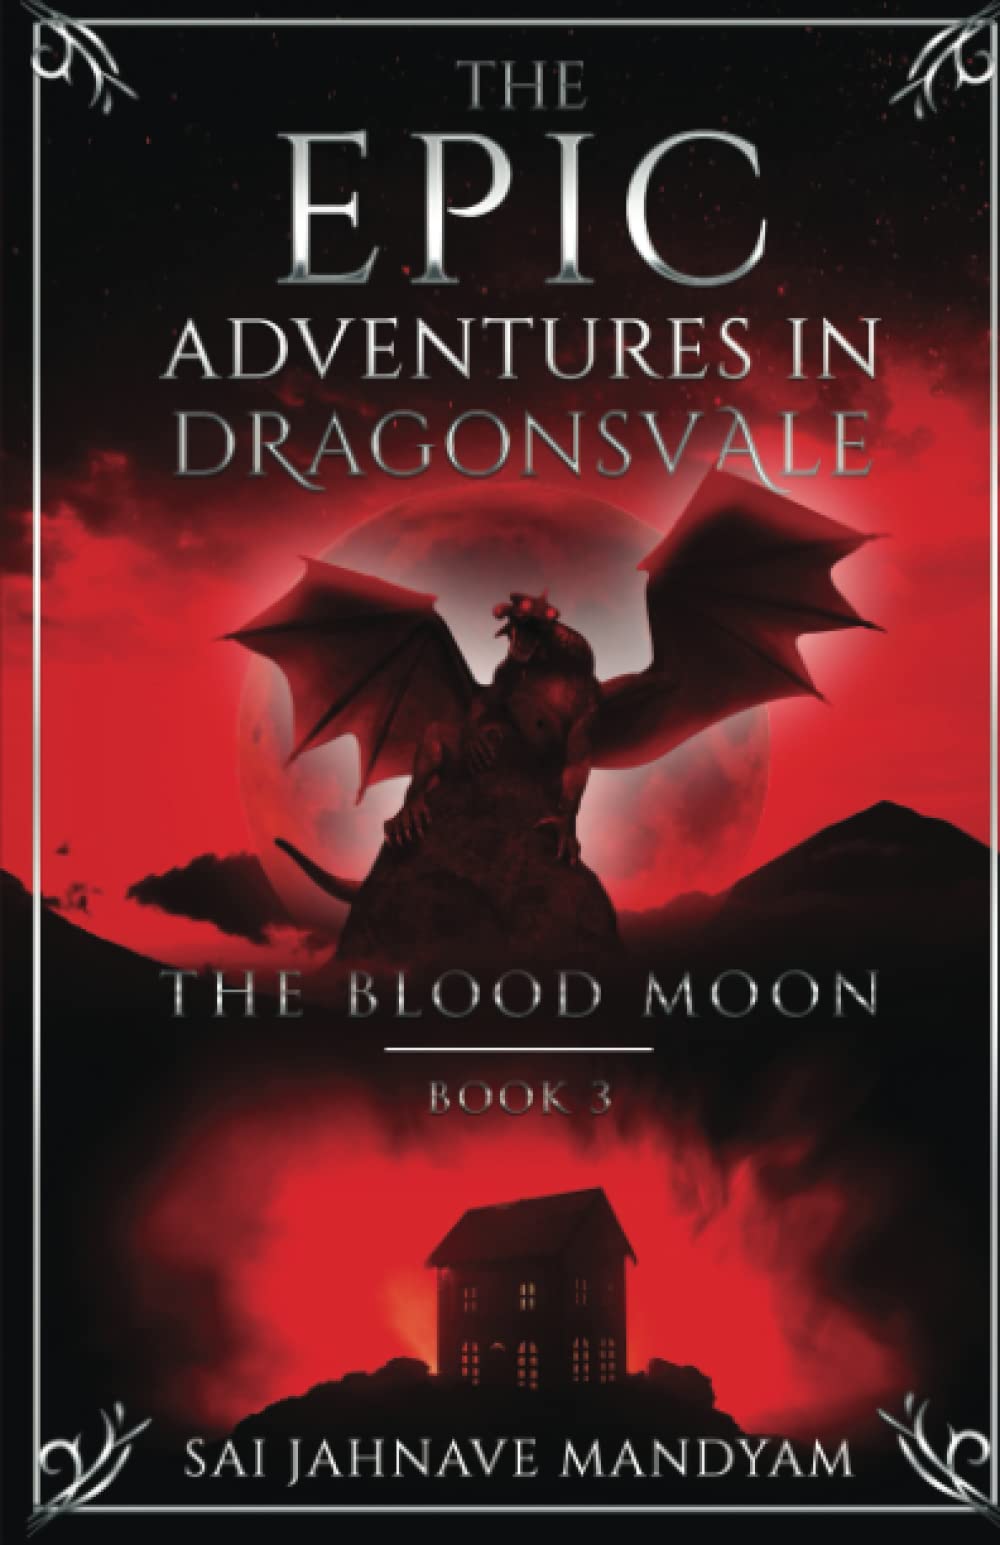 The Epic Adventures in Dragonsvale - The Blood Moon